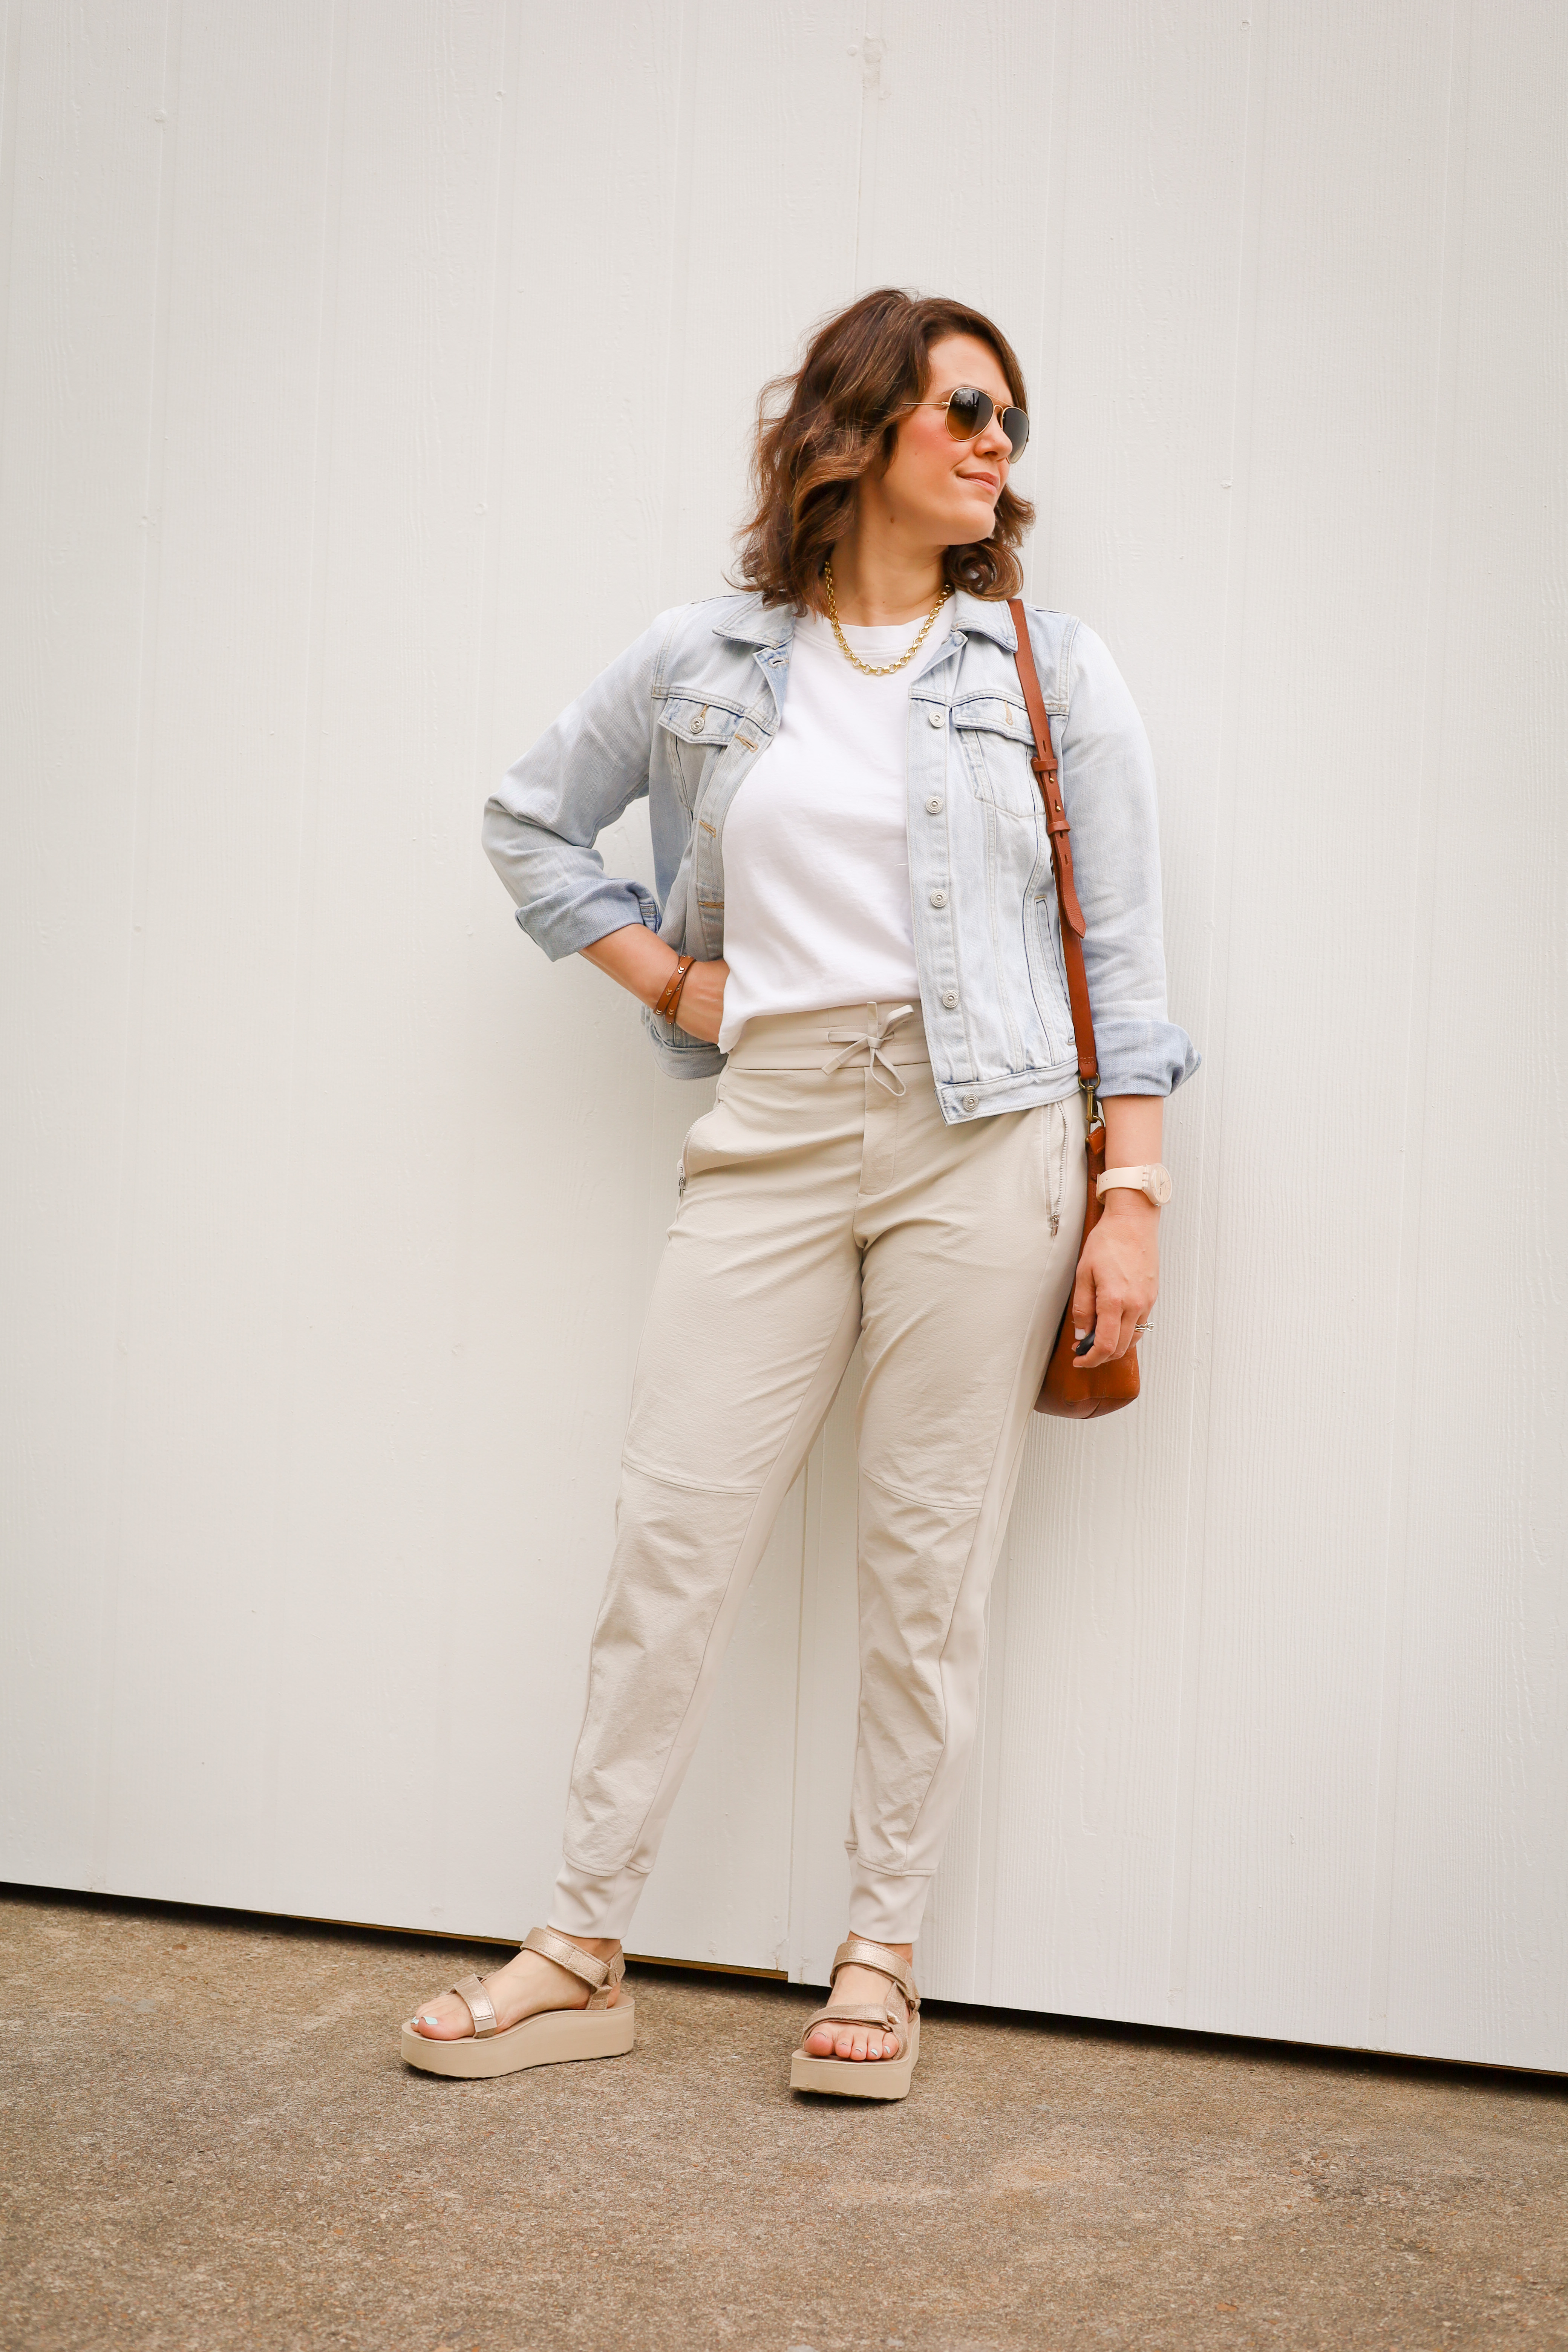 5 outfits with Tevas